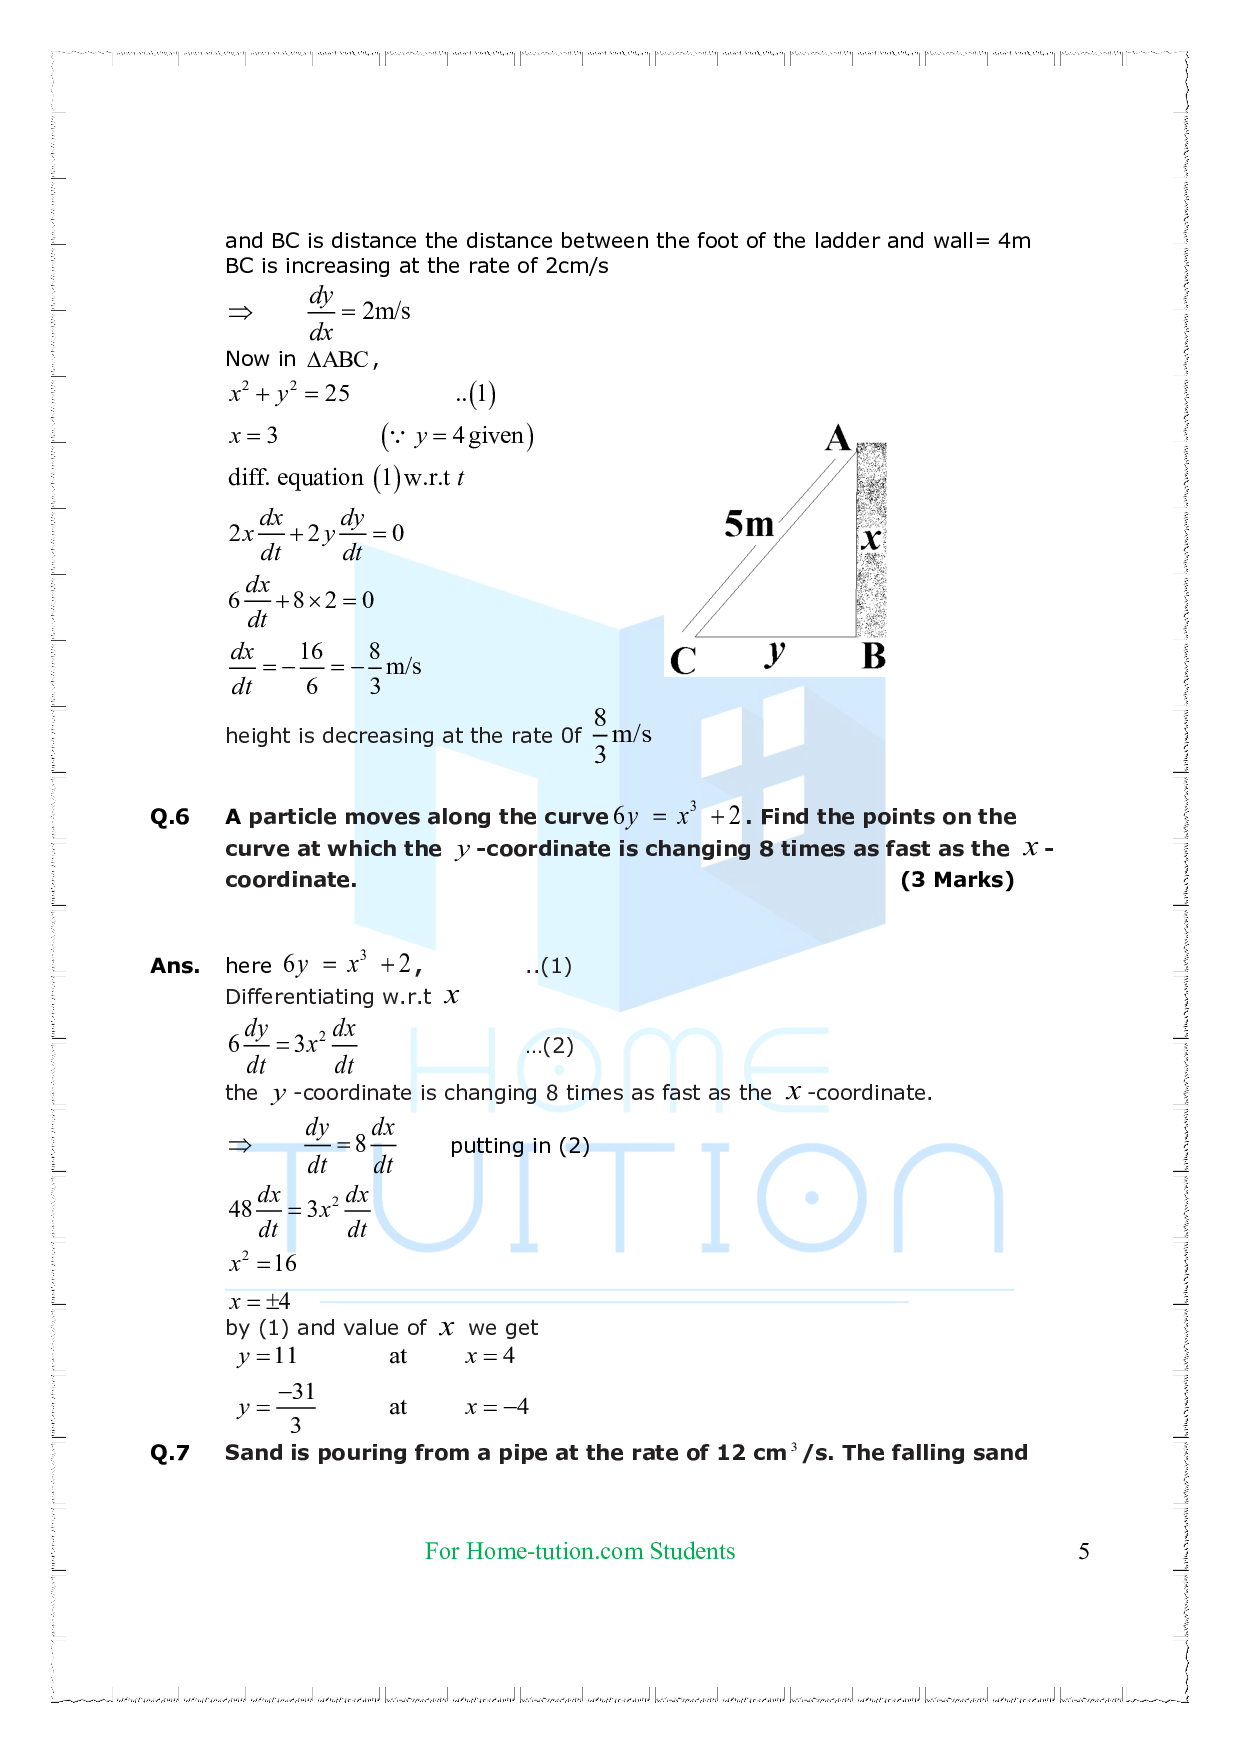 Chapter 6 Applications of Derivatives Important Questions